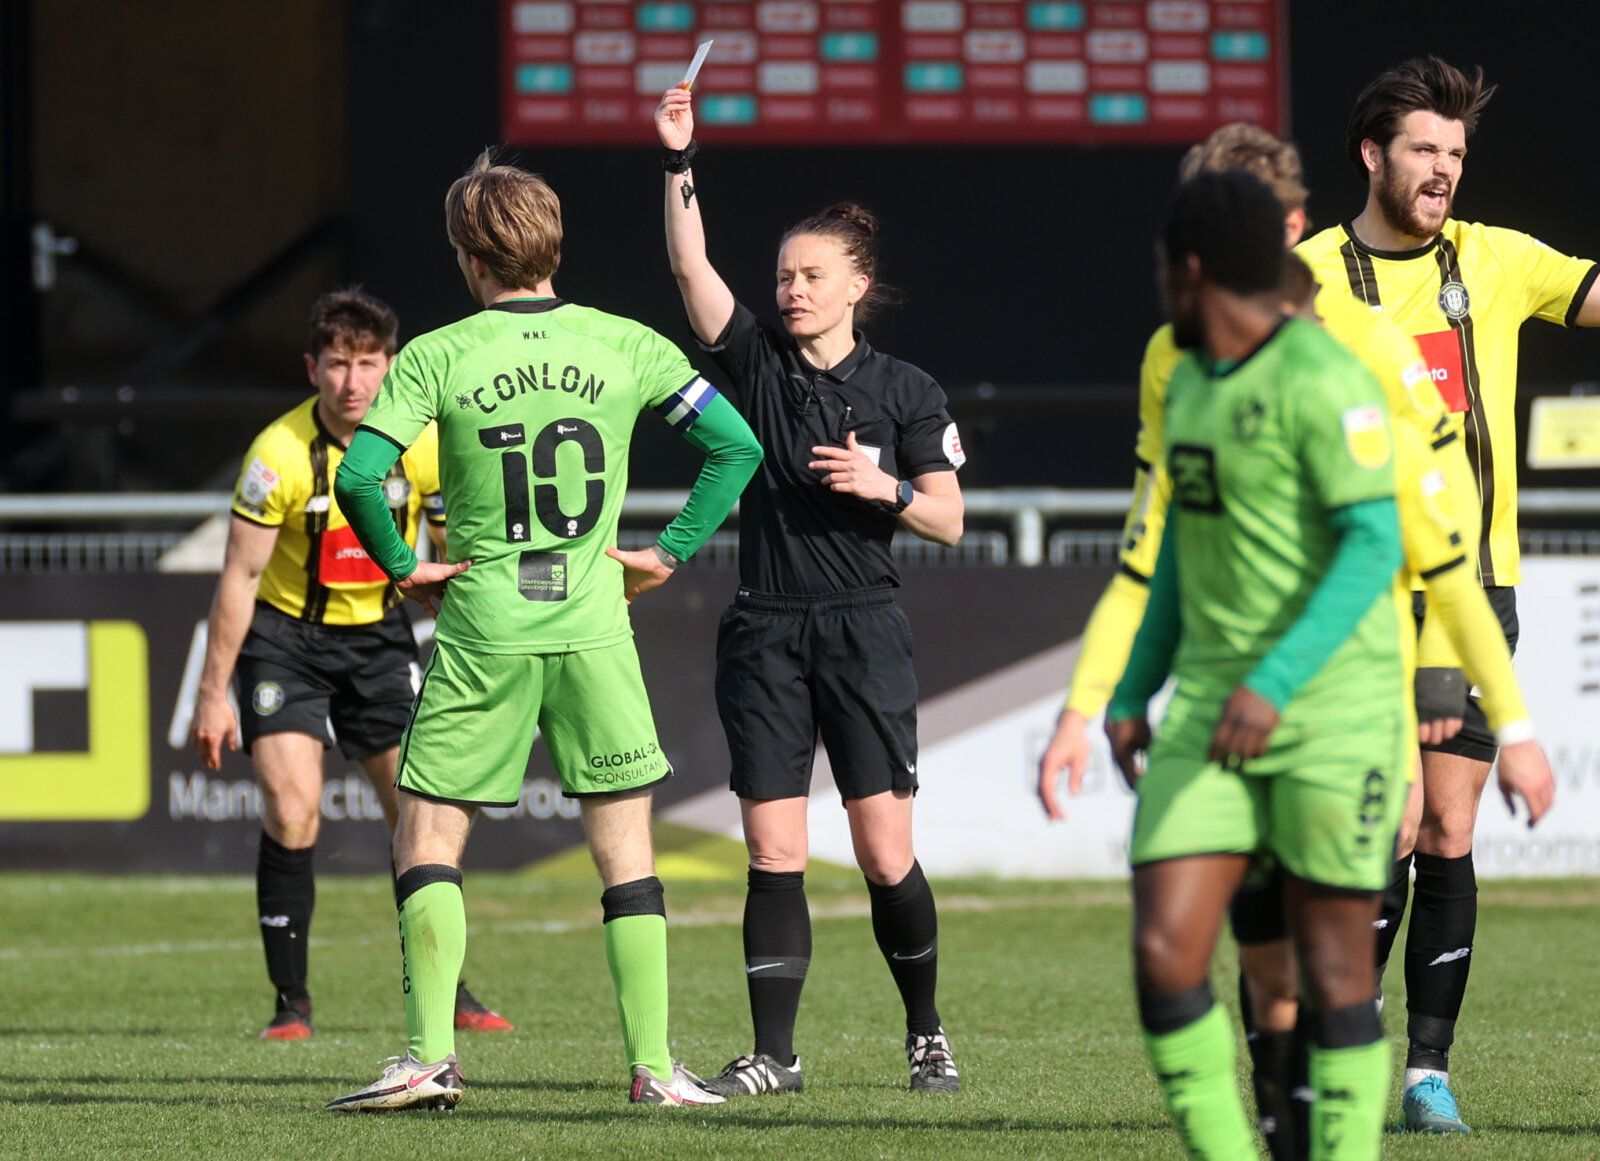 Soccer Football - League Two - Harrogate Town v Port Vale - Wetherby Road, Harrogate, Britain - April 5, 2021 Port Vale's Tom Conlon is booked by referee Rebecca Welch during the match. She is the first female referee to be appointed to an English Football League match. Action Images via Reuters/Carl Recine EDITORIAL USE ONLY. No use with unauthorized audio, video, data, fixture lists, club/league logos or 'live' services. Online in-match use limited to 75 images, no video emulation. No use in b